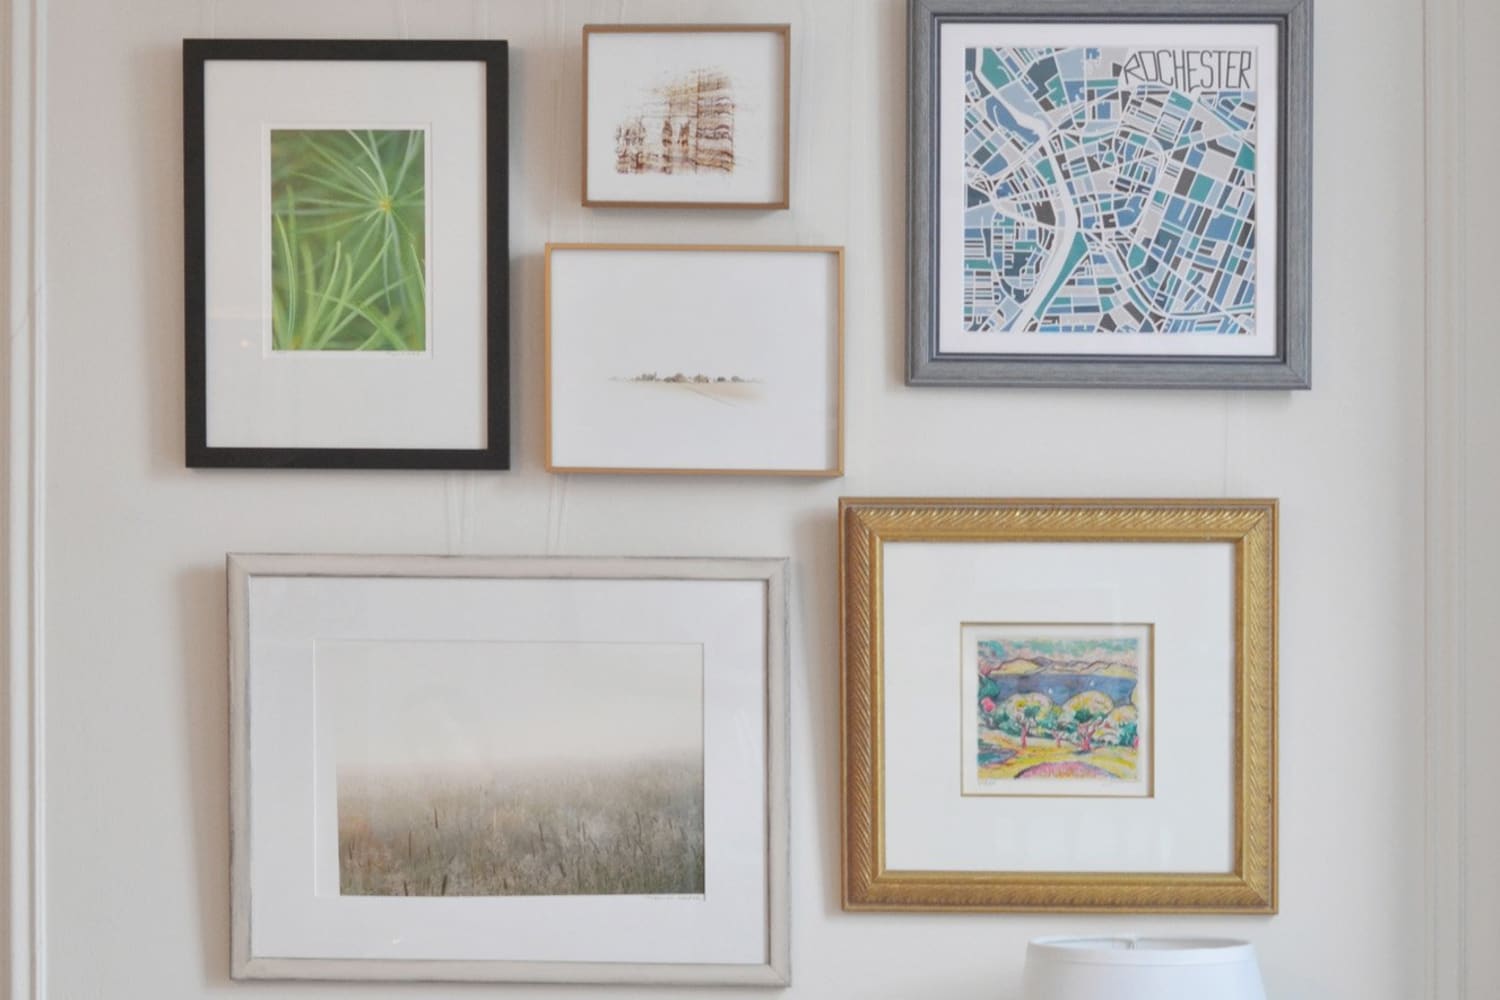 Frugal Living: How To Frame Your Art on the Cheap | Apartment Therapy